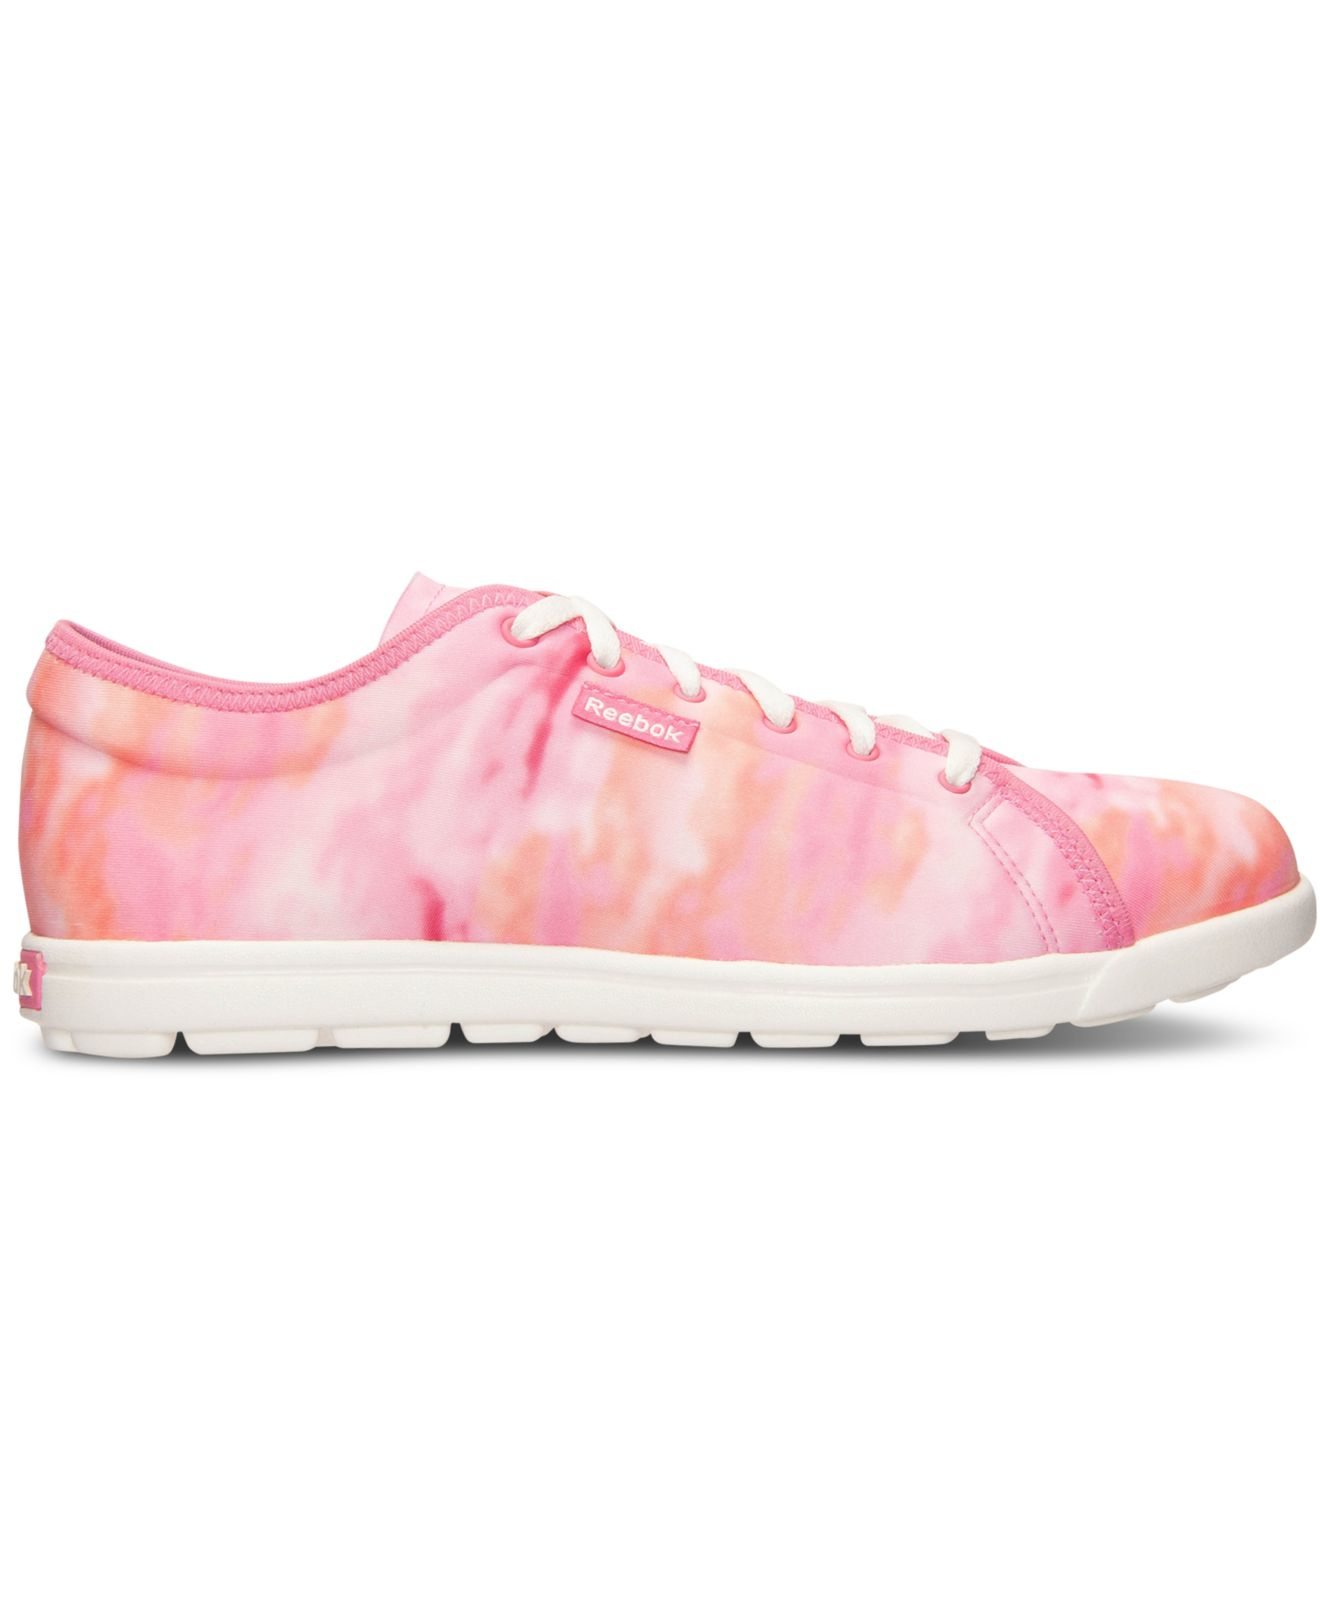 Women's Skyscape Runaround 2.0 Walking Sneakers From Finish Line in Pink | Lyst